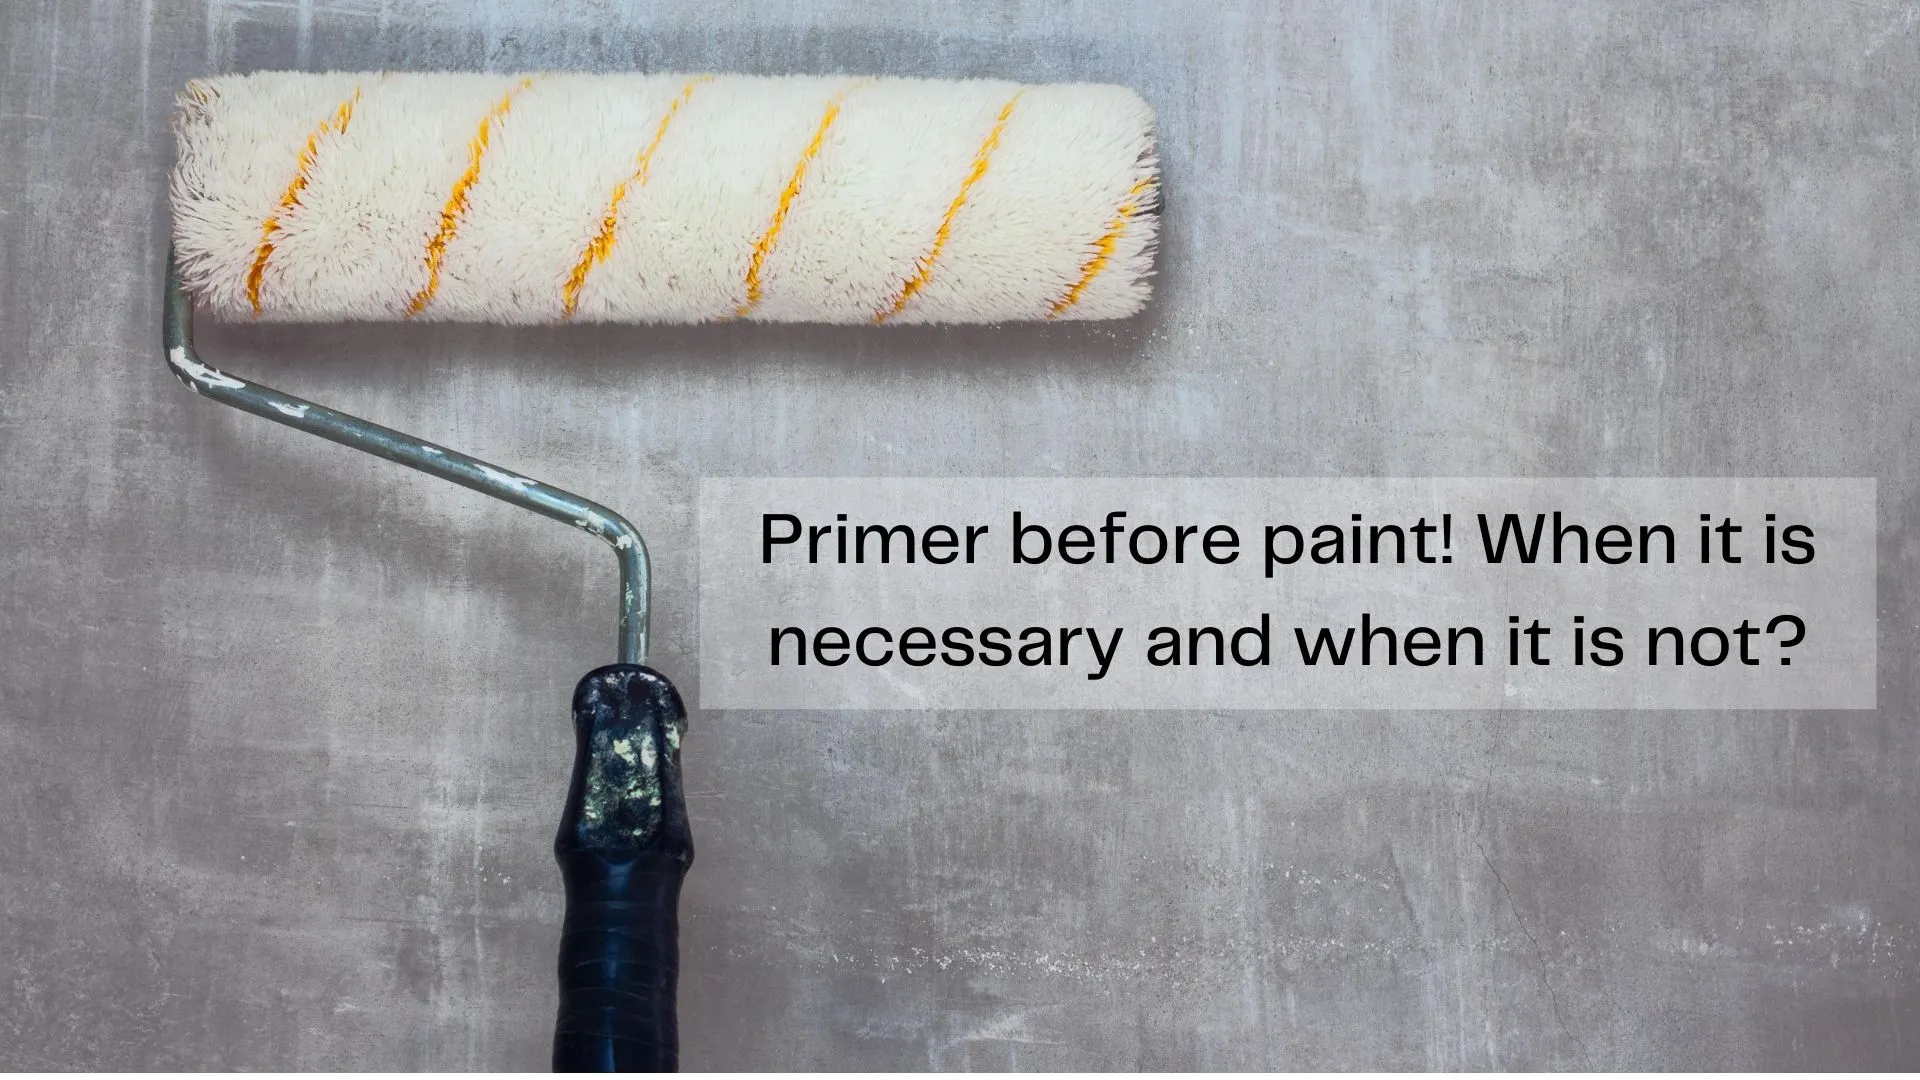 Is Primer Paint Necessary Before Painting?